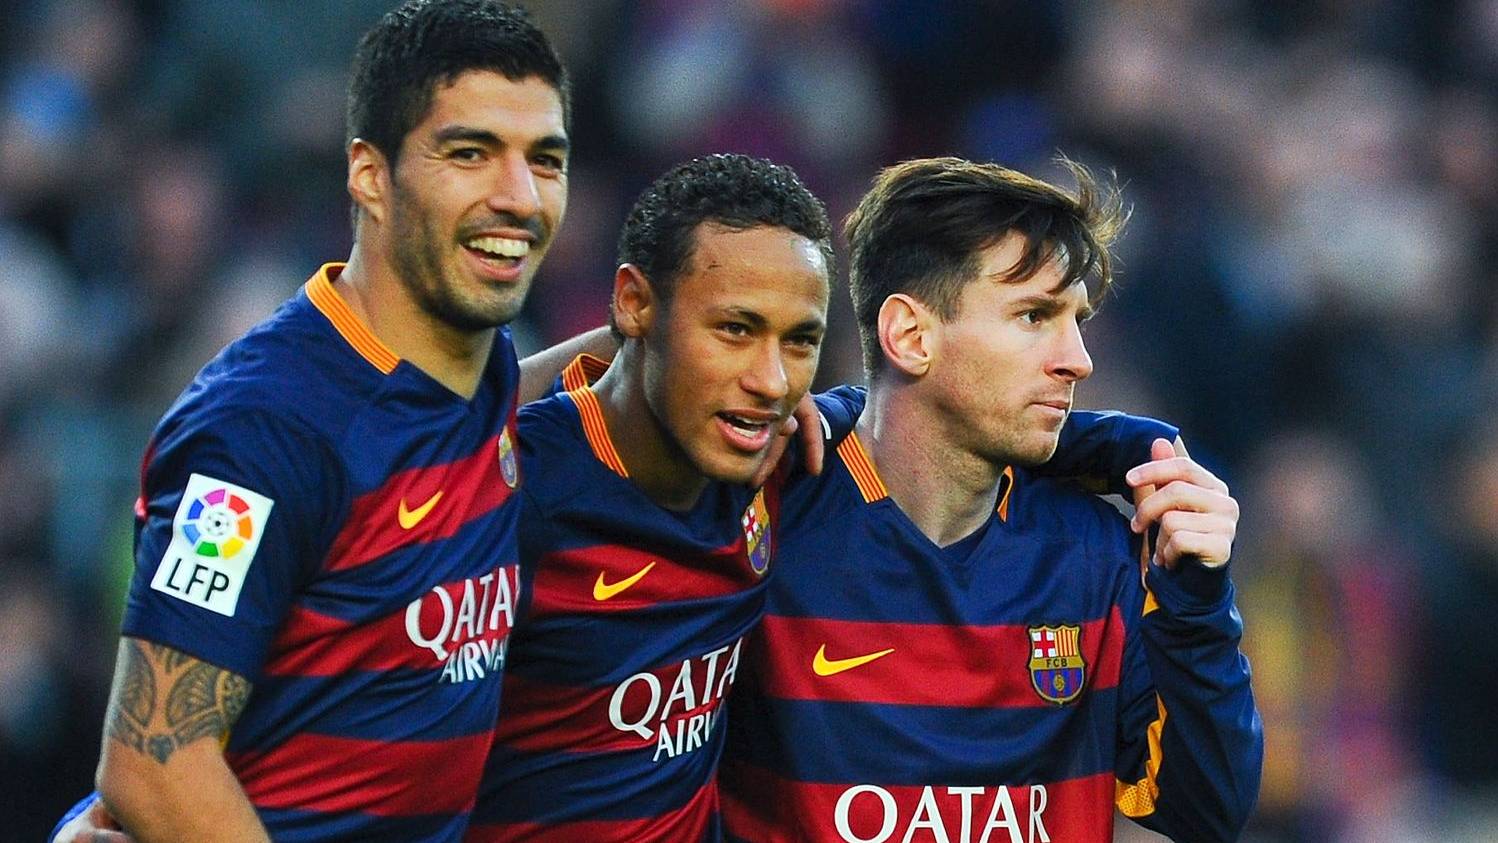 The MSN exceeded the 250 together goals in two campaigns